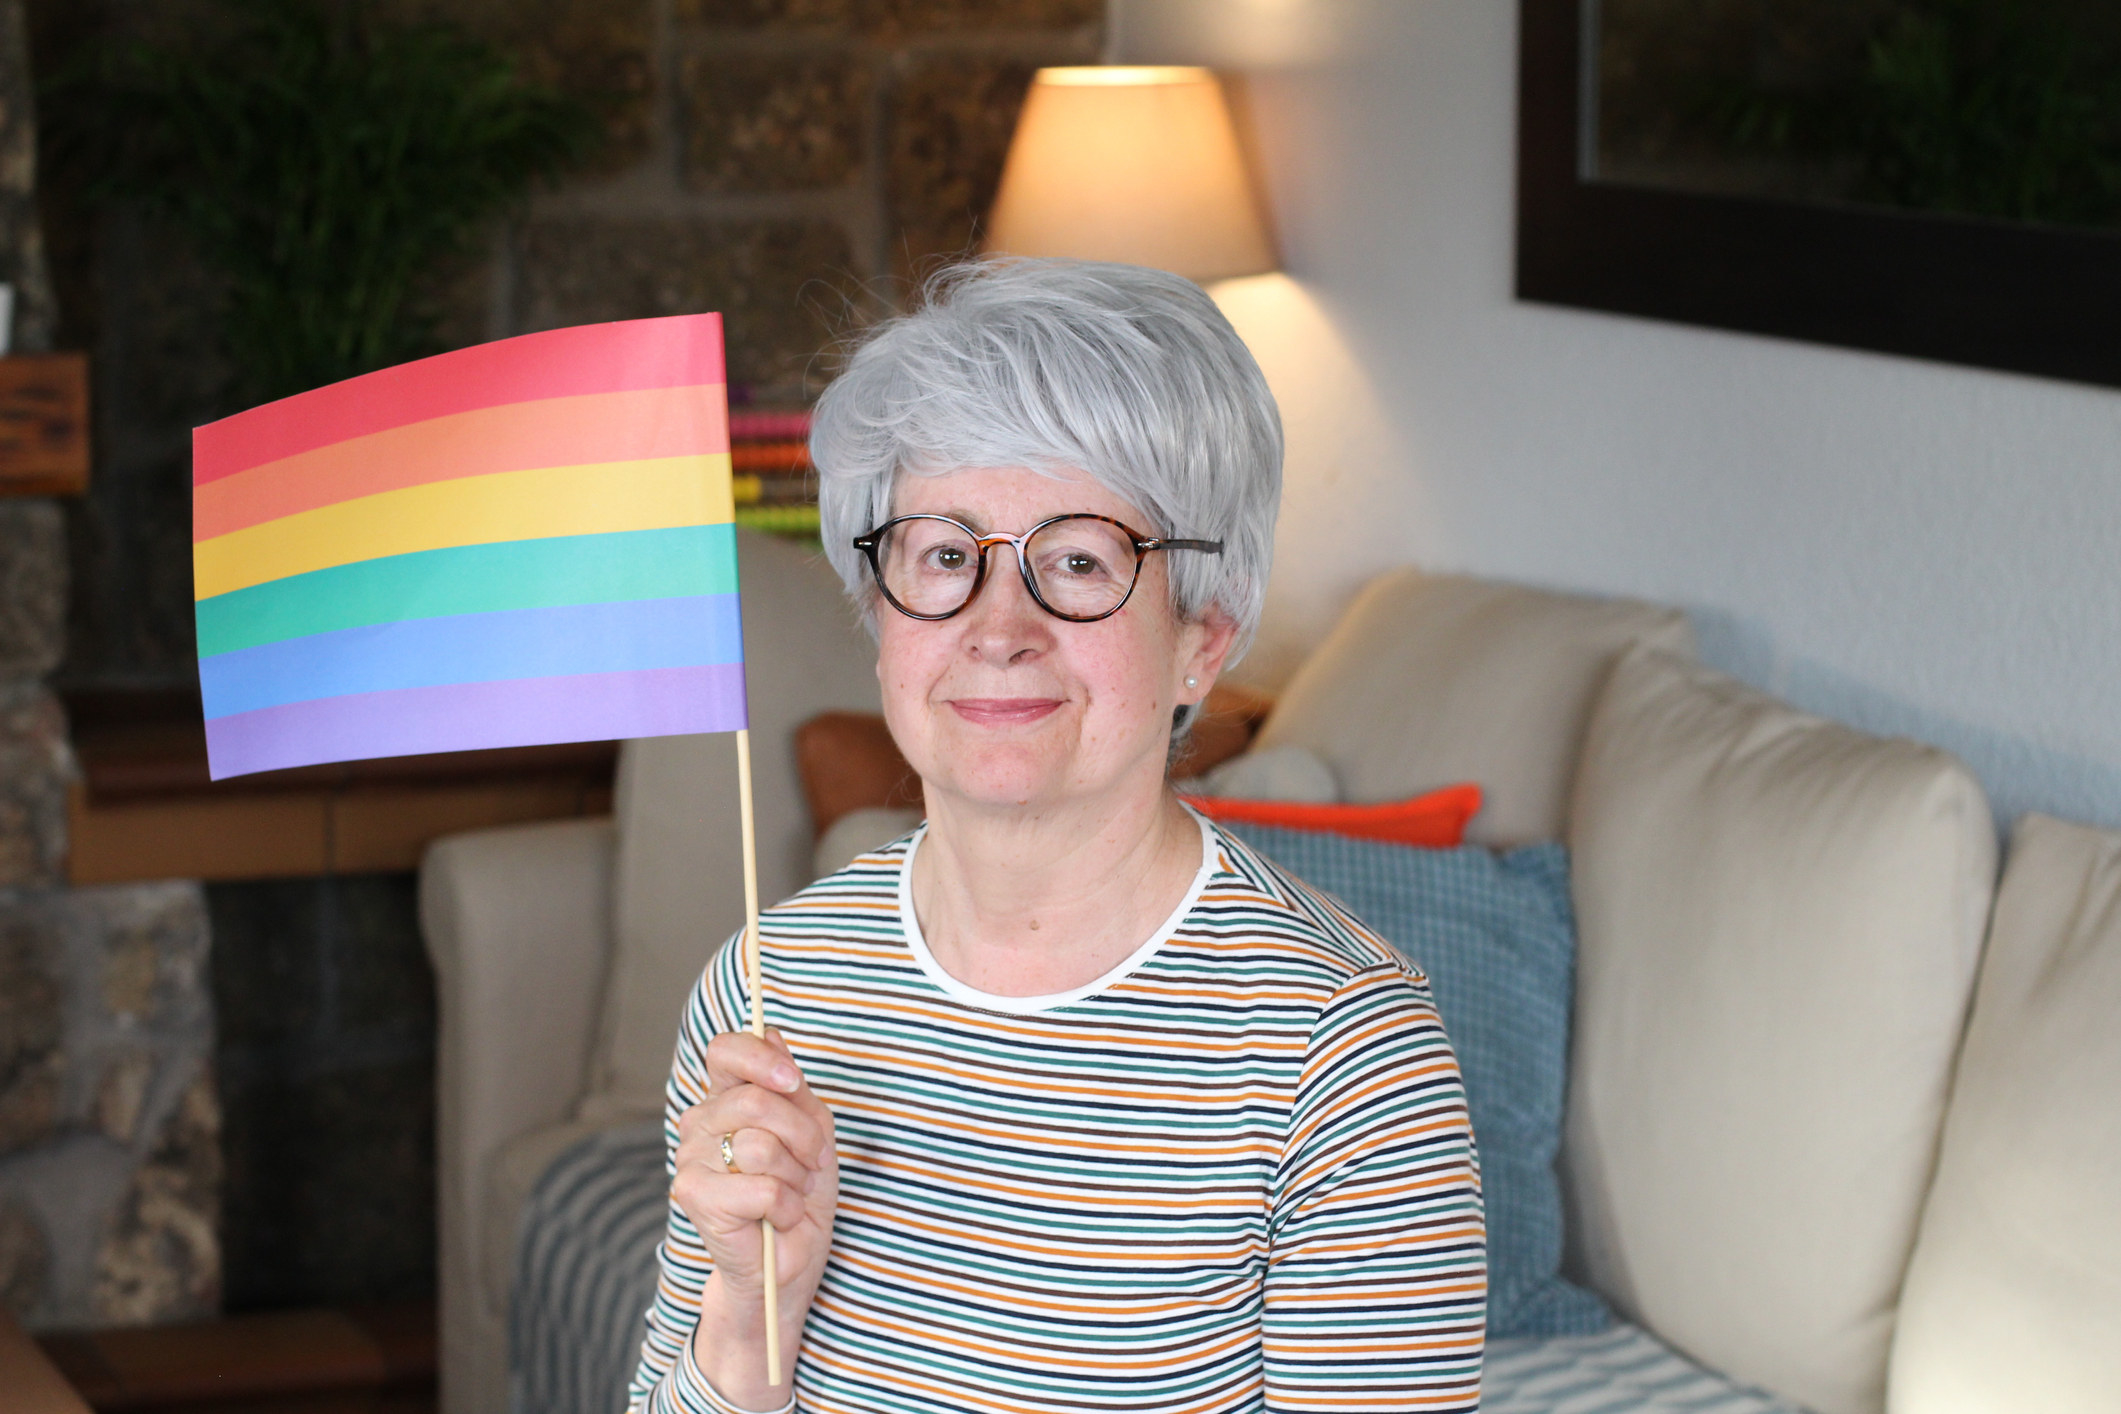 Woman holding a Pride flag and sitting on a couch